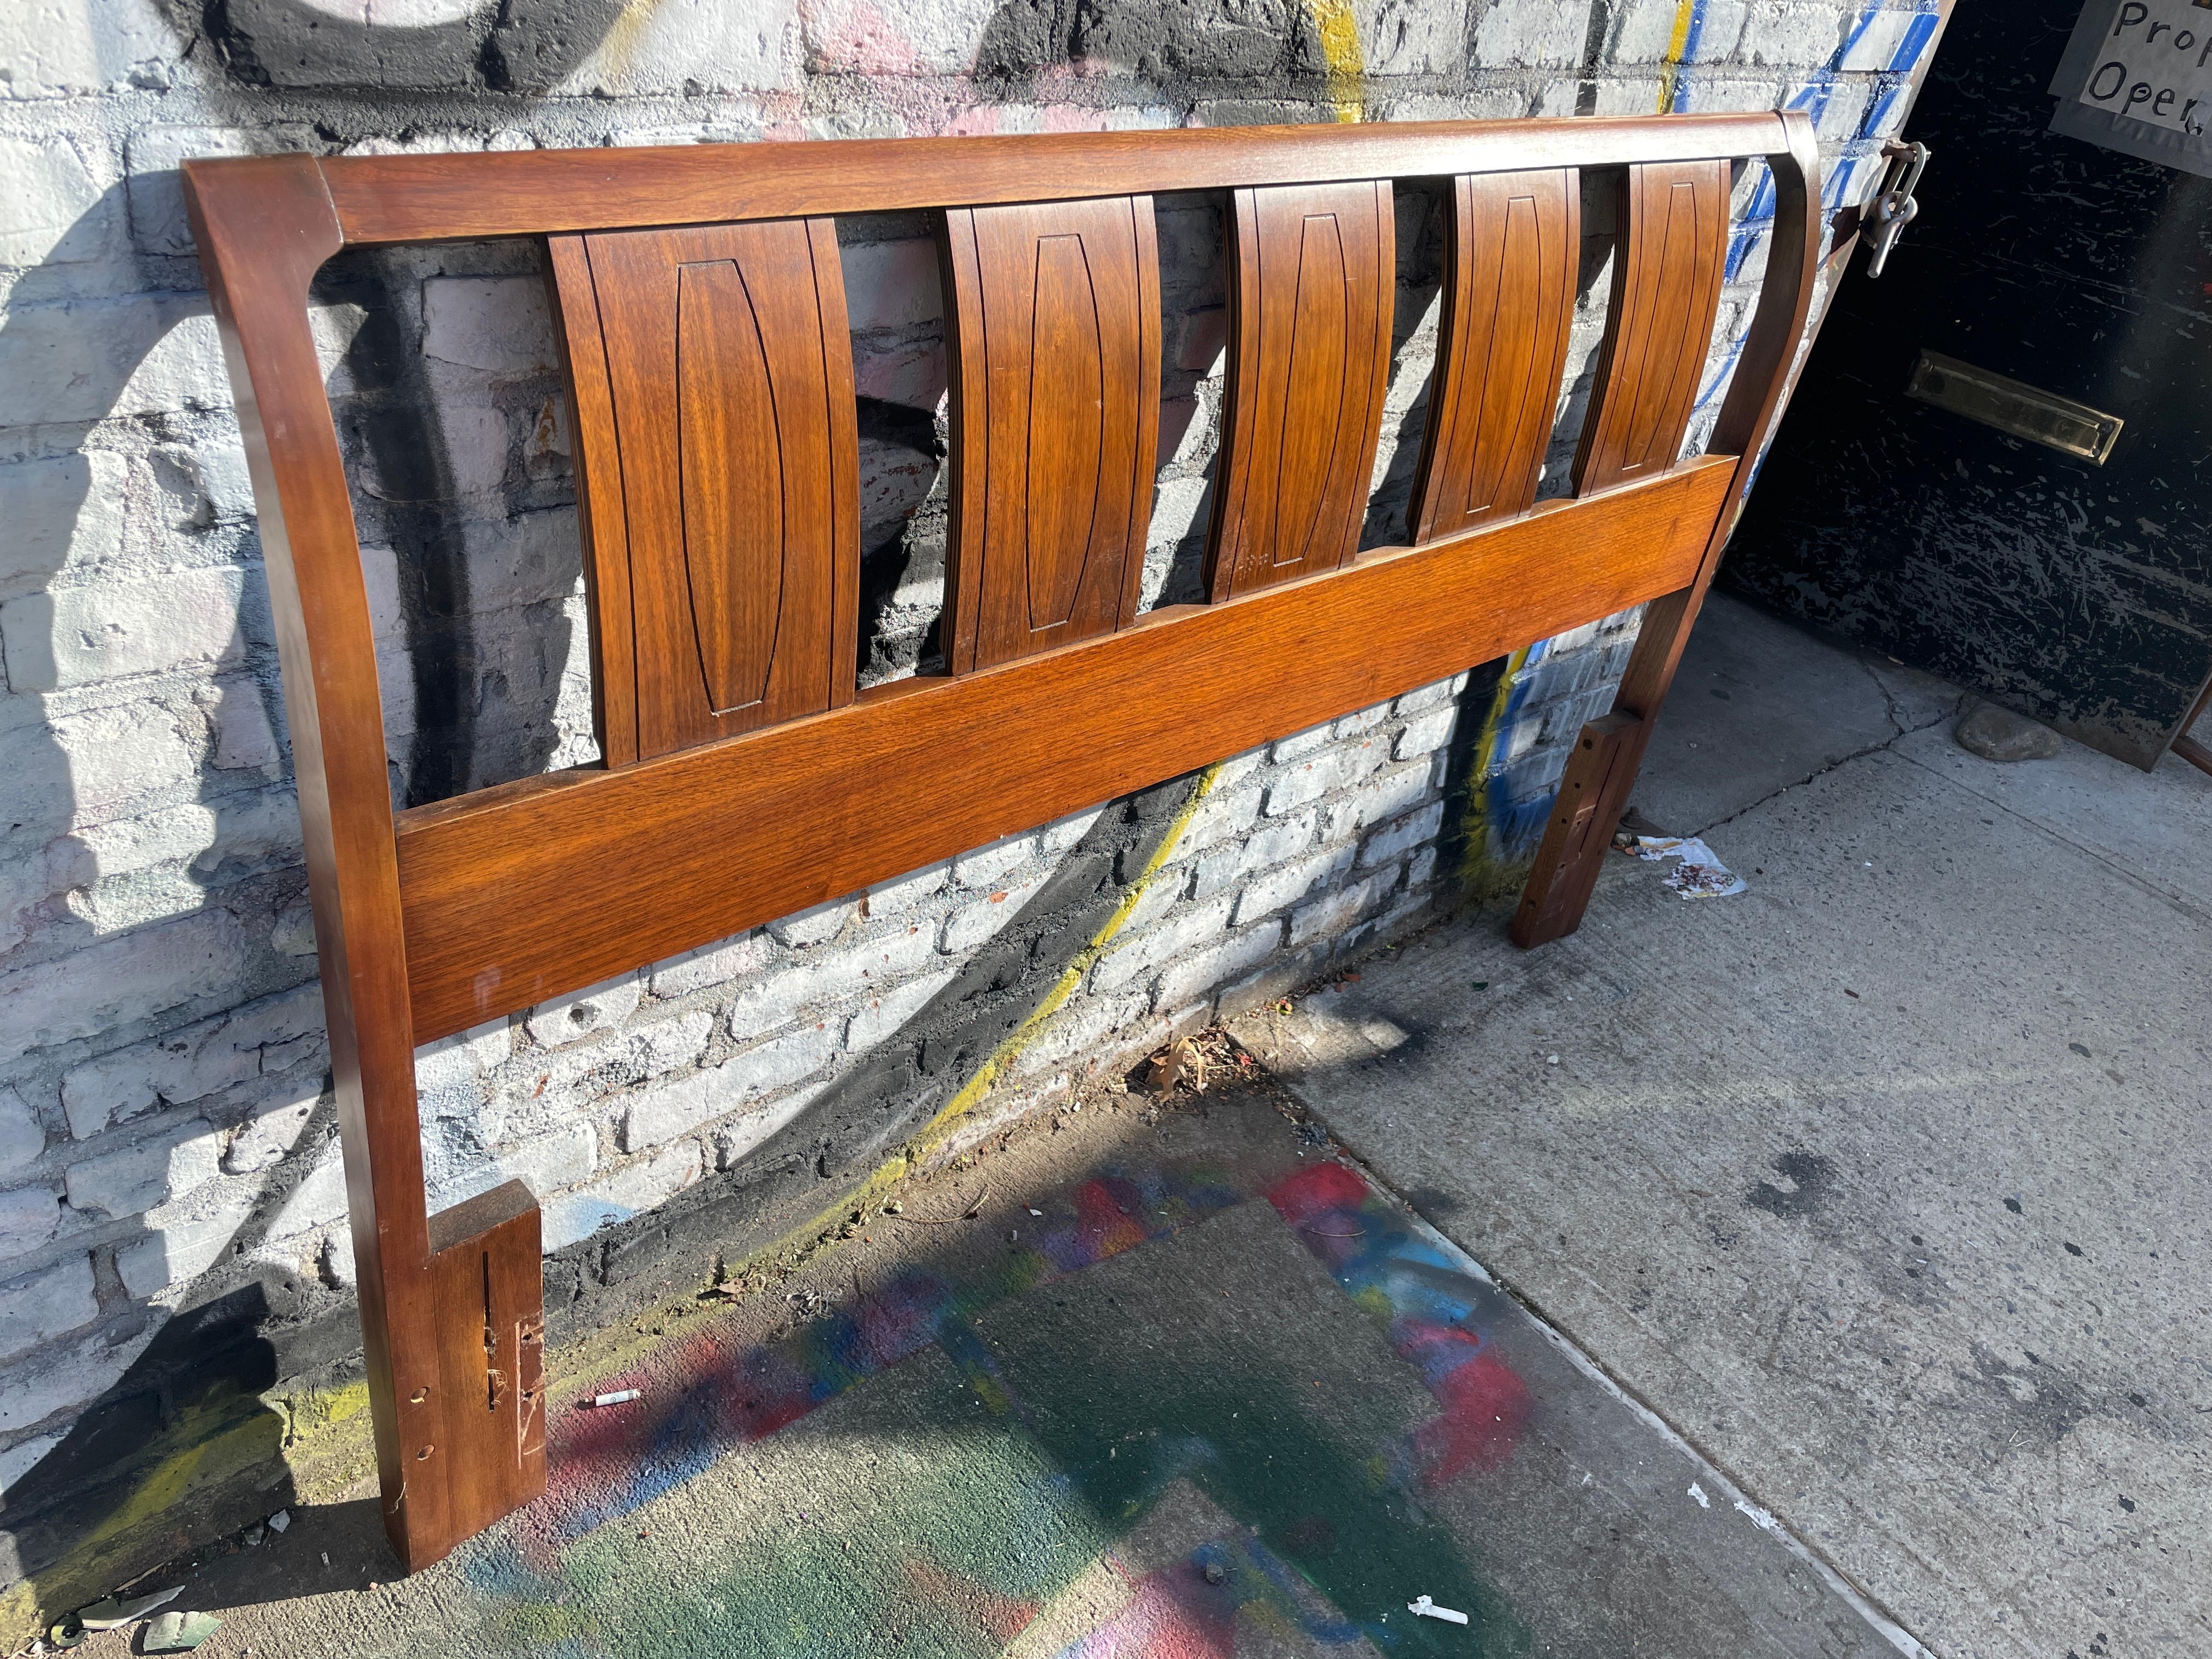 Beautiful mid-century queen headboard made in usa in wonderful condition. Really wood grain bent wood headboard with wood details. Fits a queen sized mattress. Bed headboard only no metal bed frame. Easily mounts to all bed frames.

Measures: 60